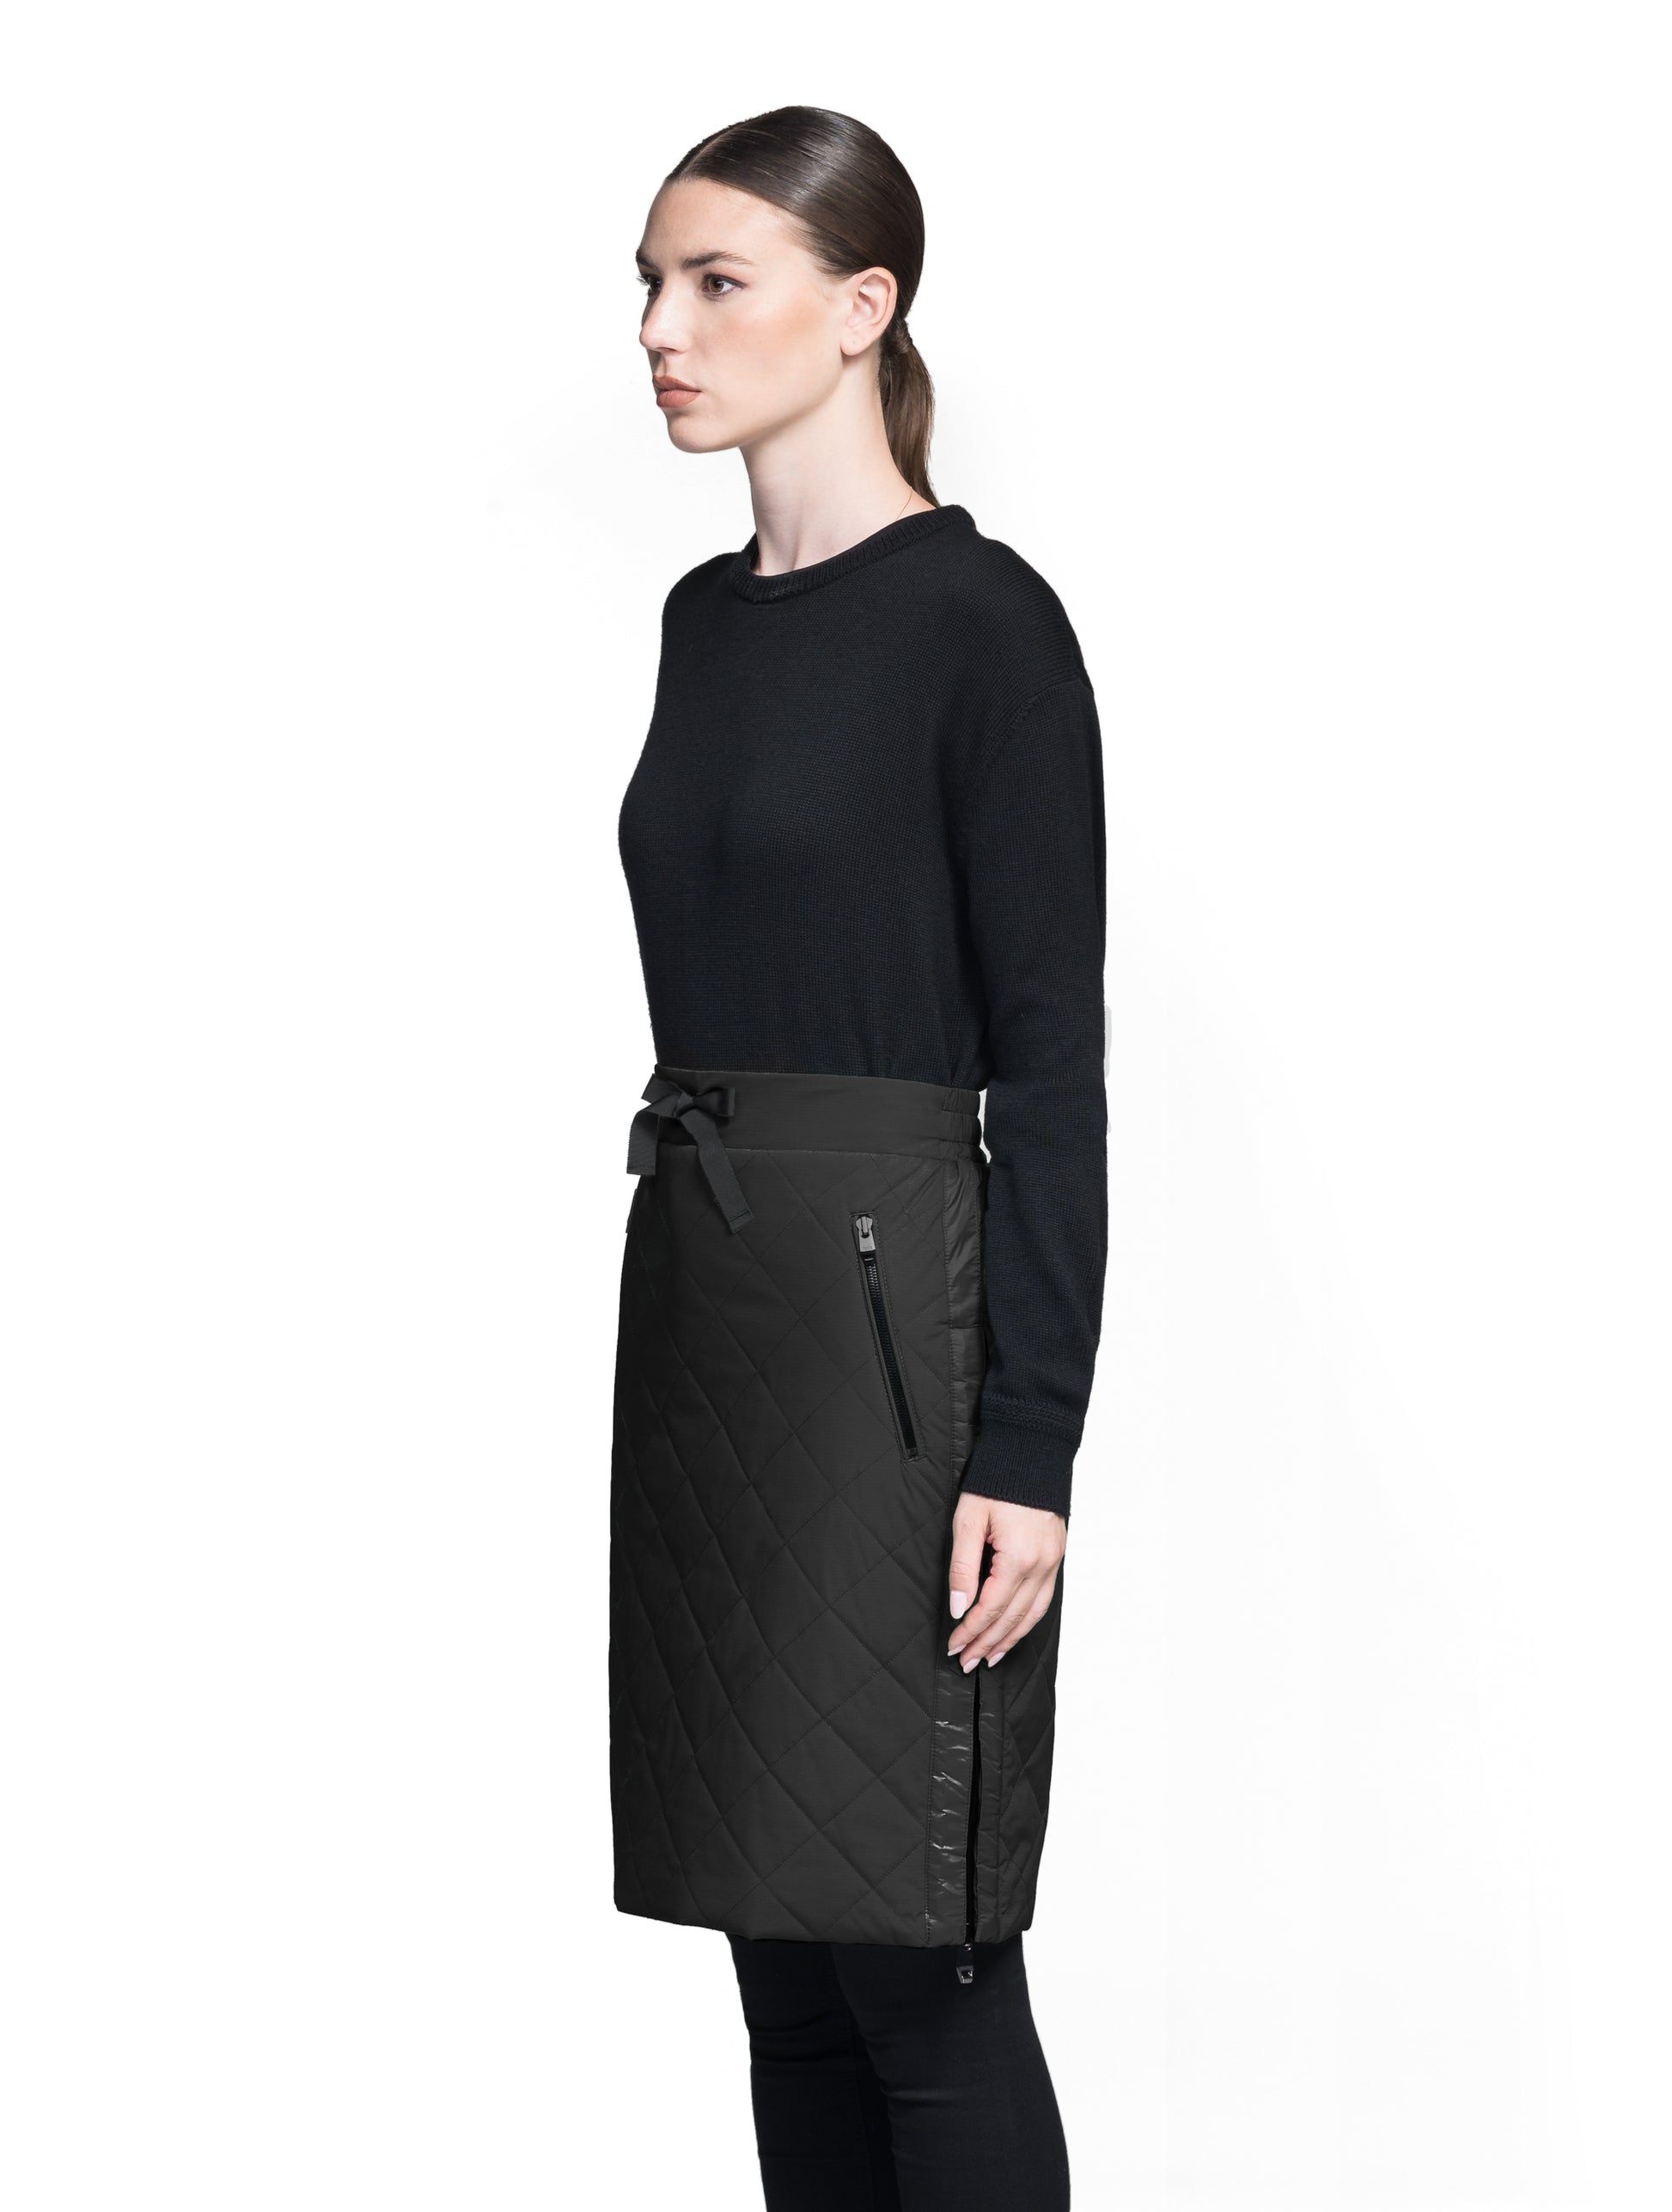 Phora Women's Tailored Skirt in knee length, premium stretch ripstop and contrast cire technical nylon taffeta fabrication, premium 4-way stretch, water resistant Primaloft Gold Insulation Active+, elasticated waistband with grosgrain ribbon drawstrings, two zipper pockets at waist, and zipper closure gusset at side seams, in Black